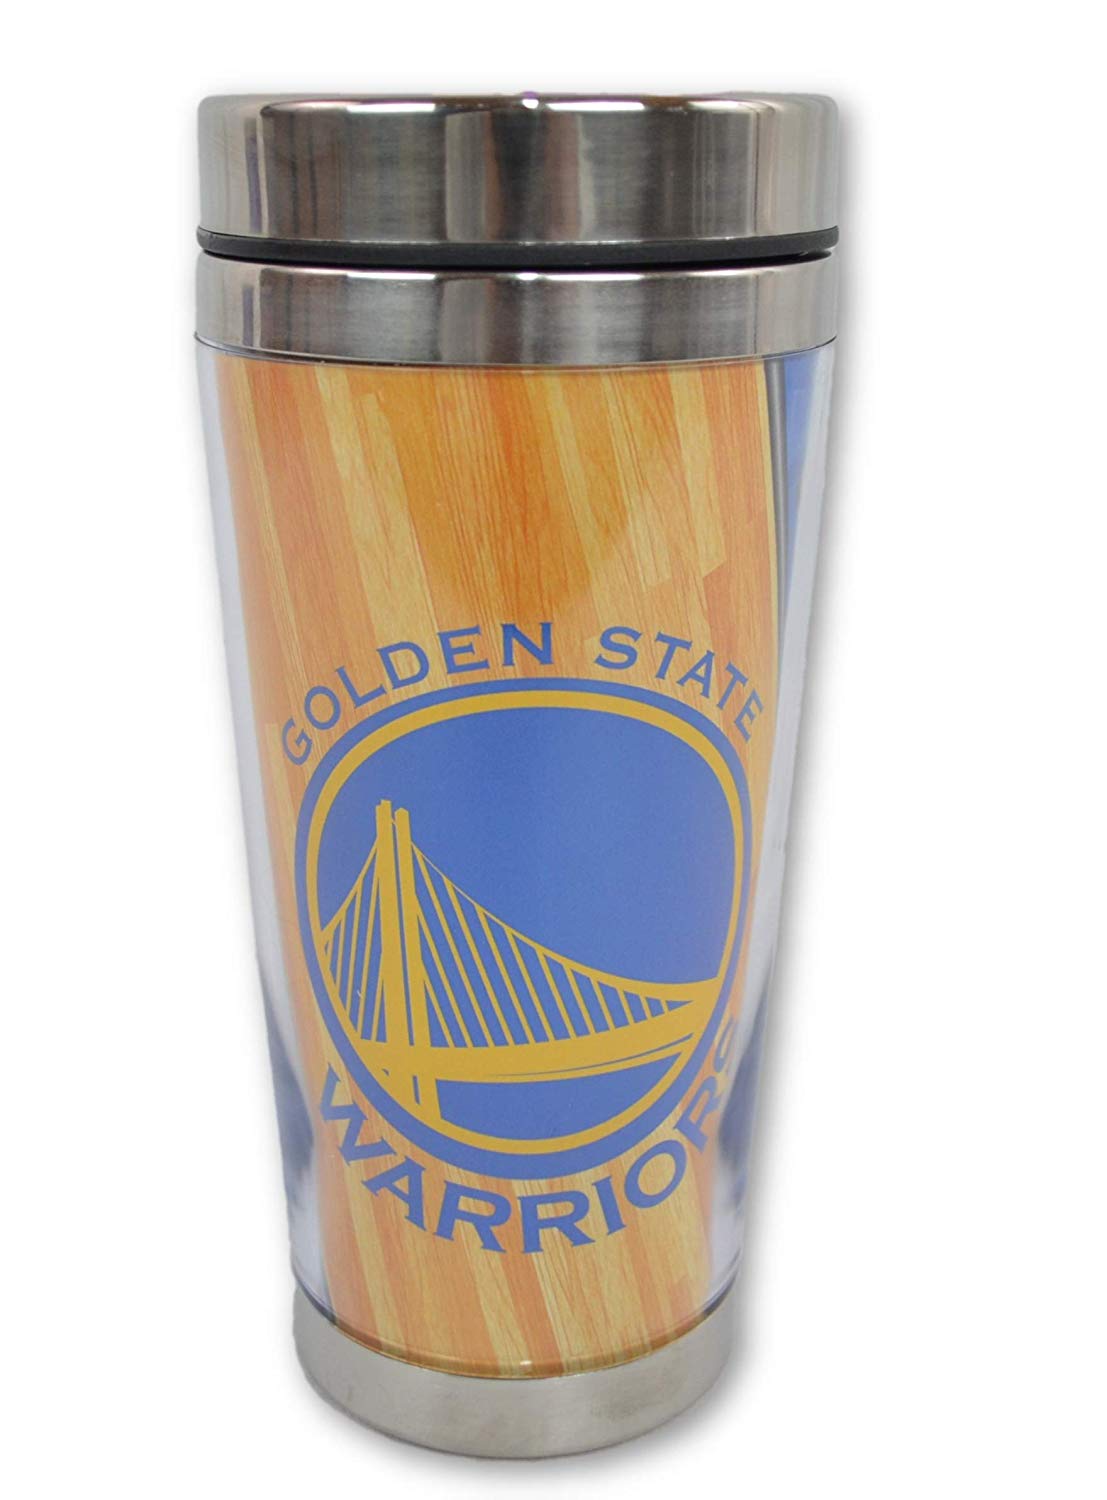 The Northwest Company NBA Fan Shop Authentic 50" x60" NBA Fleece Throw Blanket 15 oz Stainless Steel Travel Mug Bundle. Show Support You Favorite Team While Relaxing Staying Warm